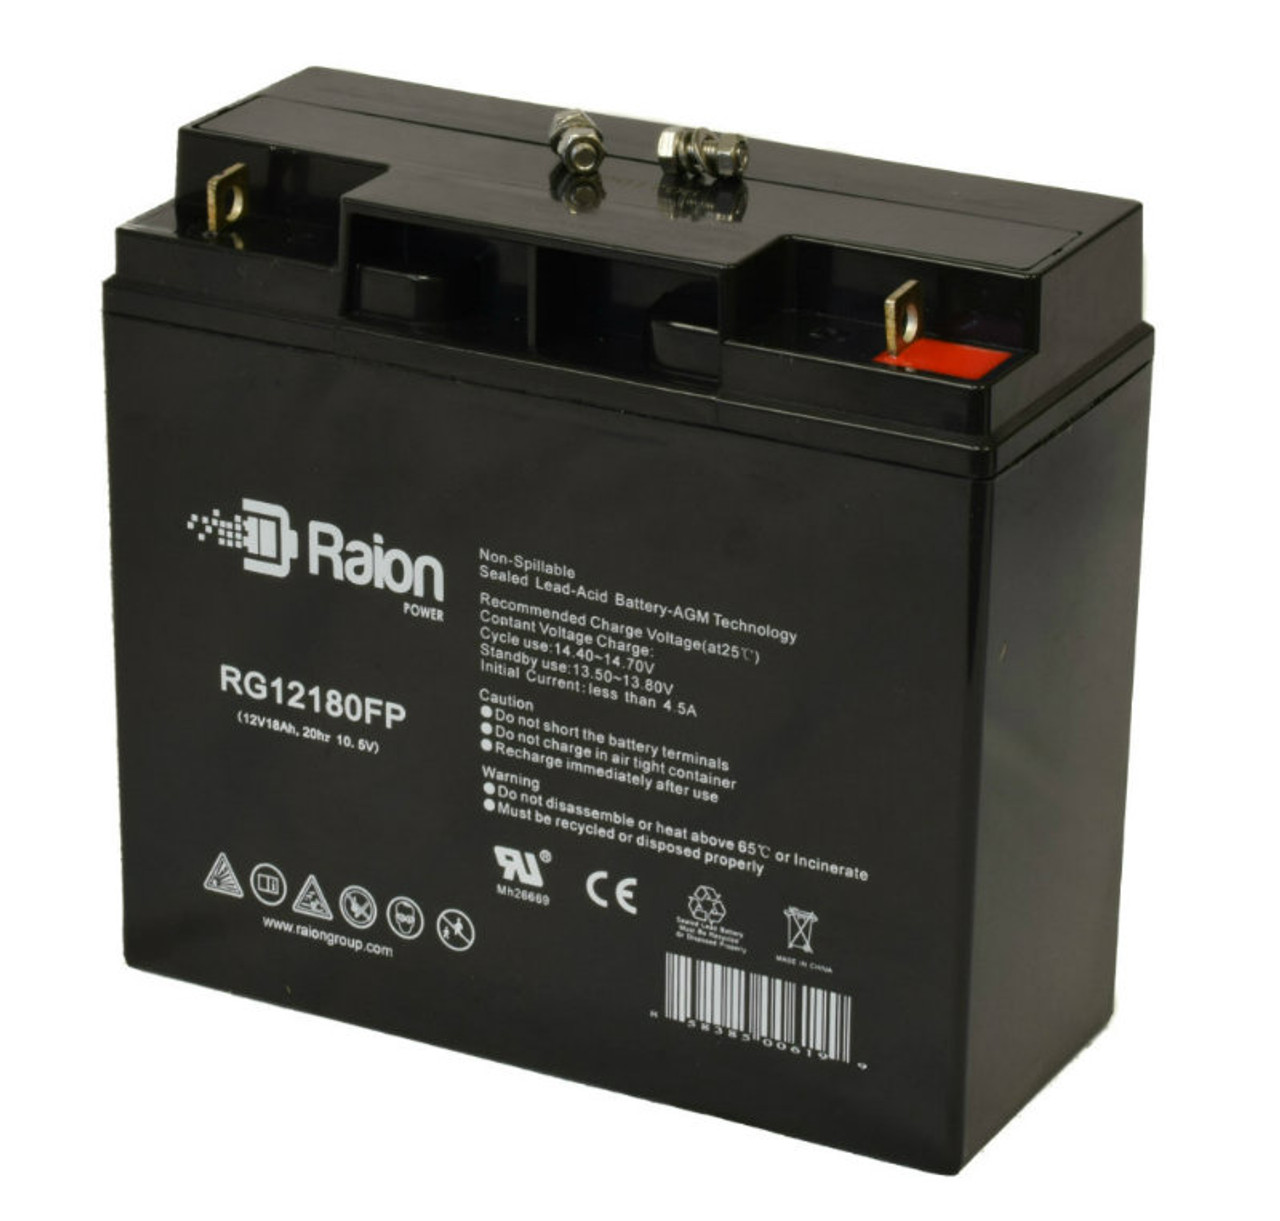 Raion Power Replacement 12V 18Ah Battery for Peak PKC0BJ 450 Amp Jump Starter with Inflator - 1 Pack